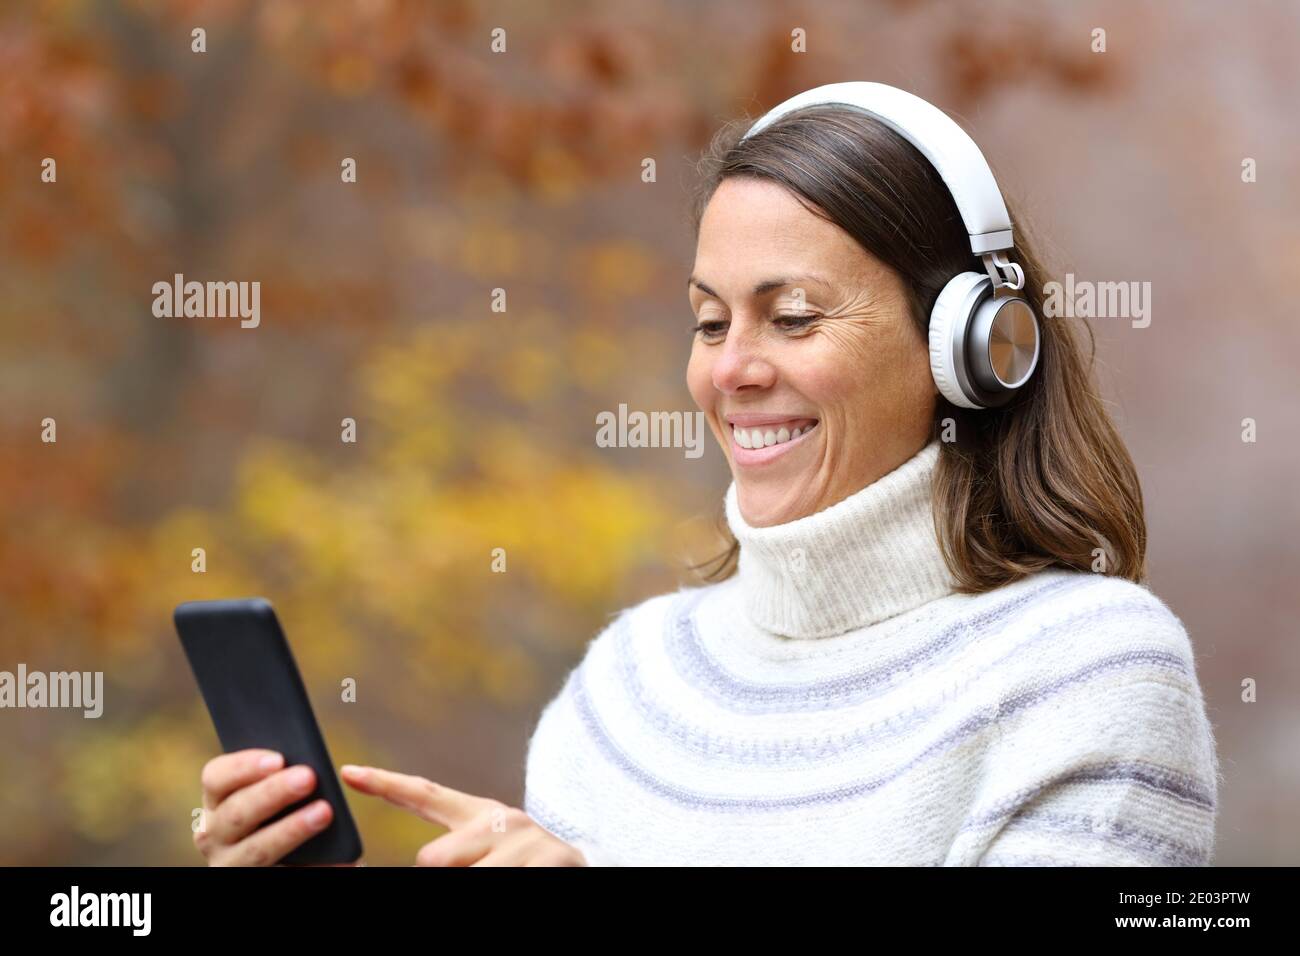 Happy adult woman using headphones and smart phone listening to music in a park in autumn Stock Photo